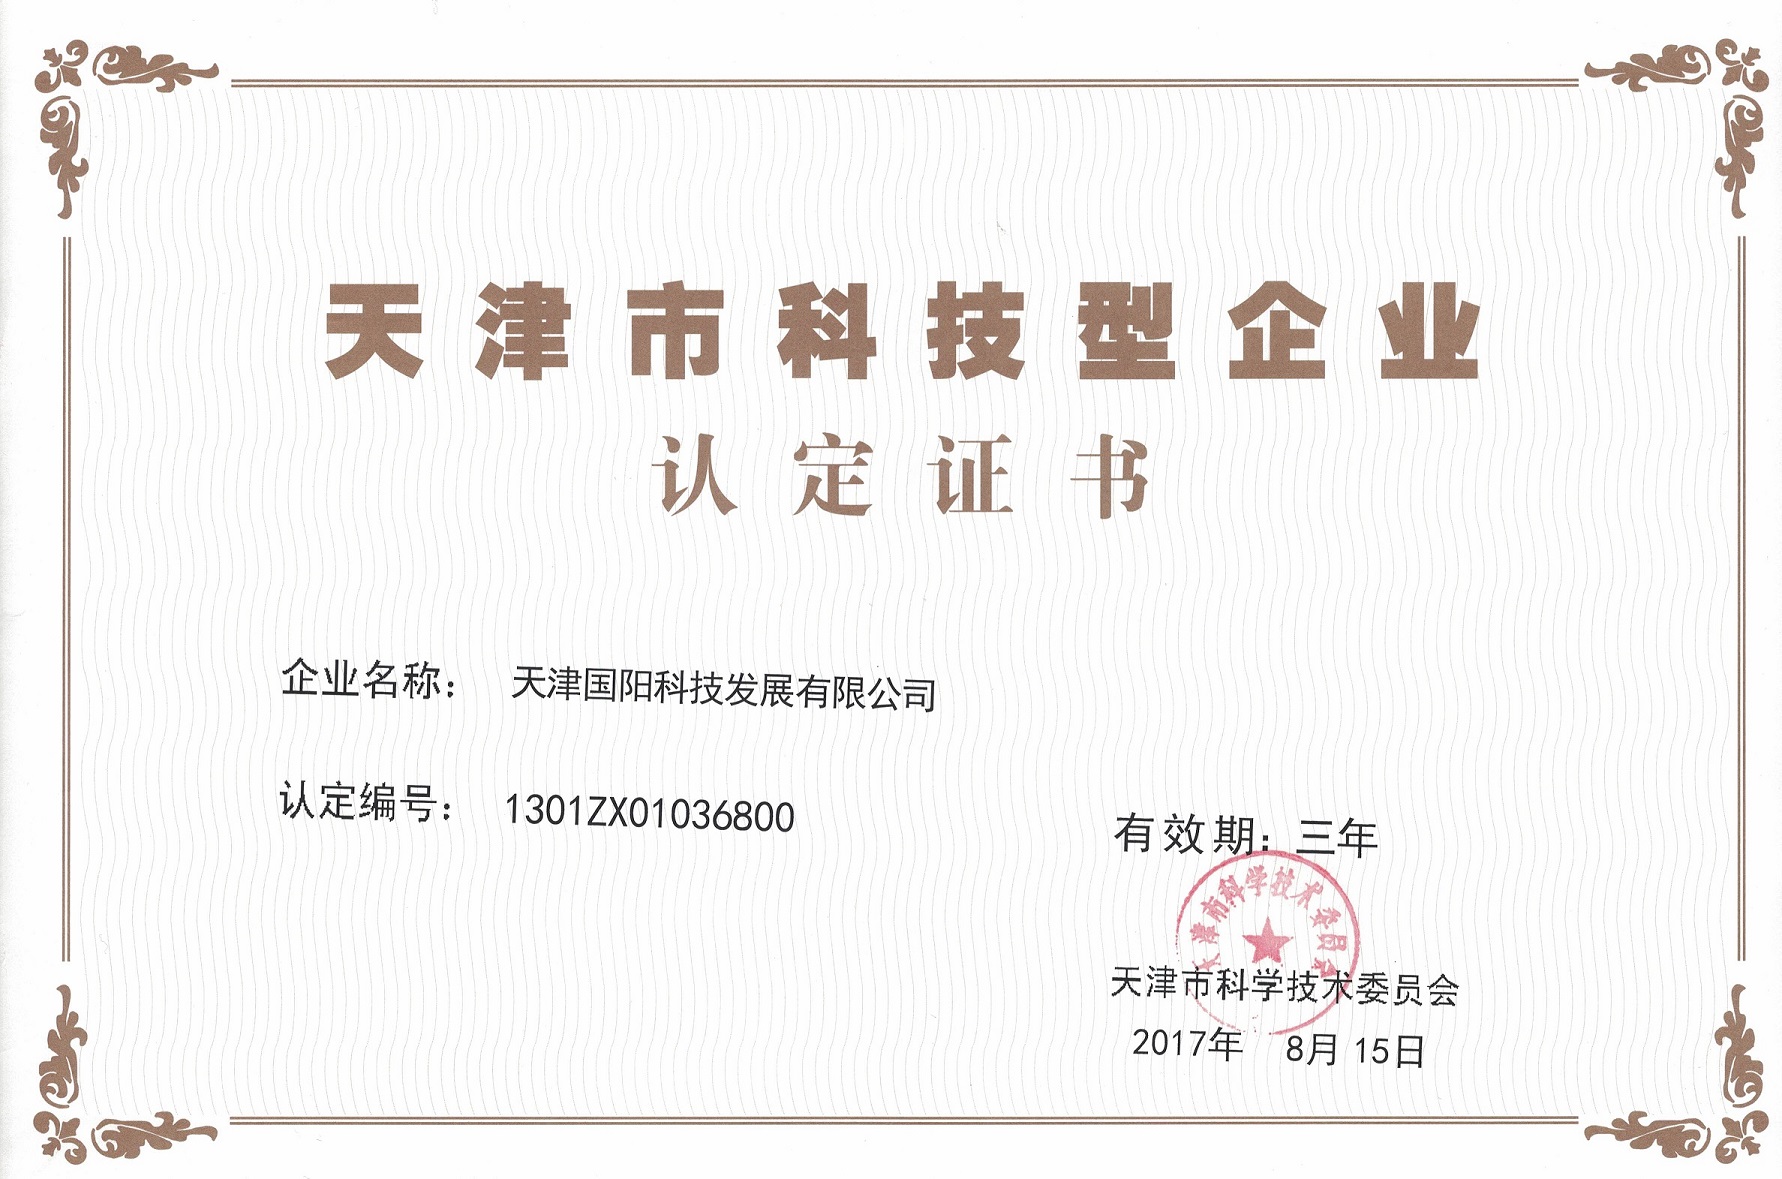 Our company was awarded the Tianjin Science and Technology Enterprise Certification